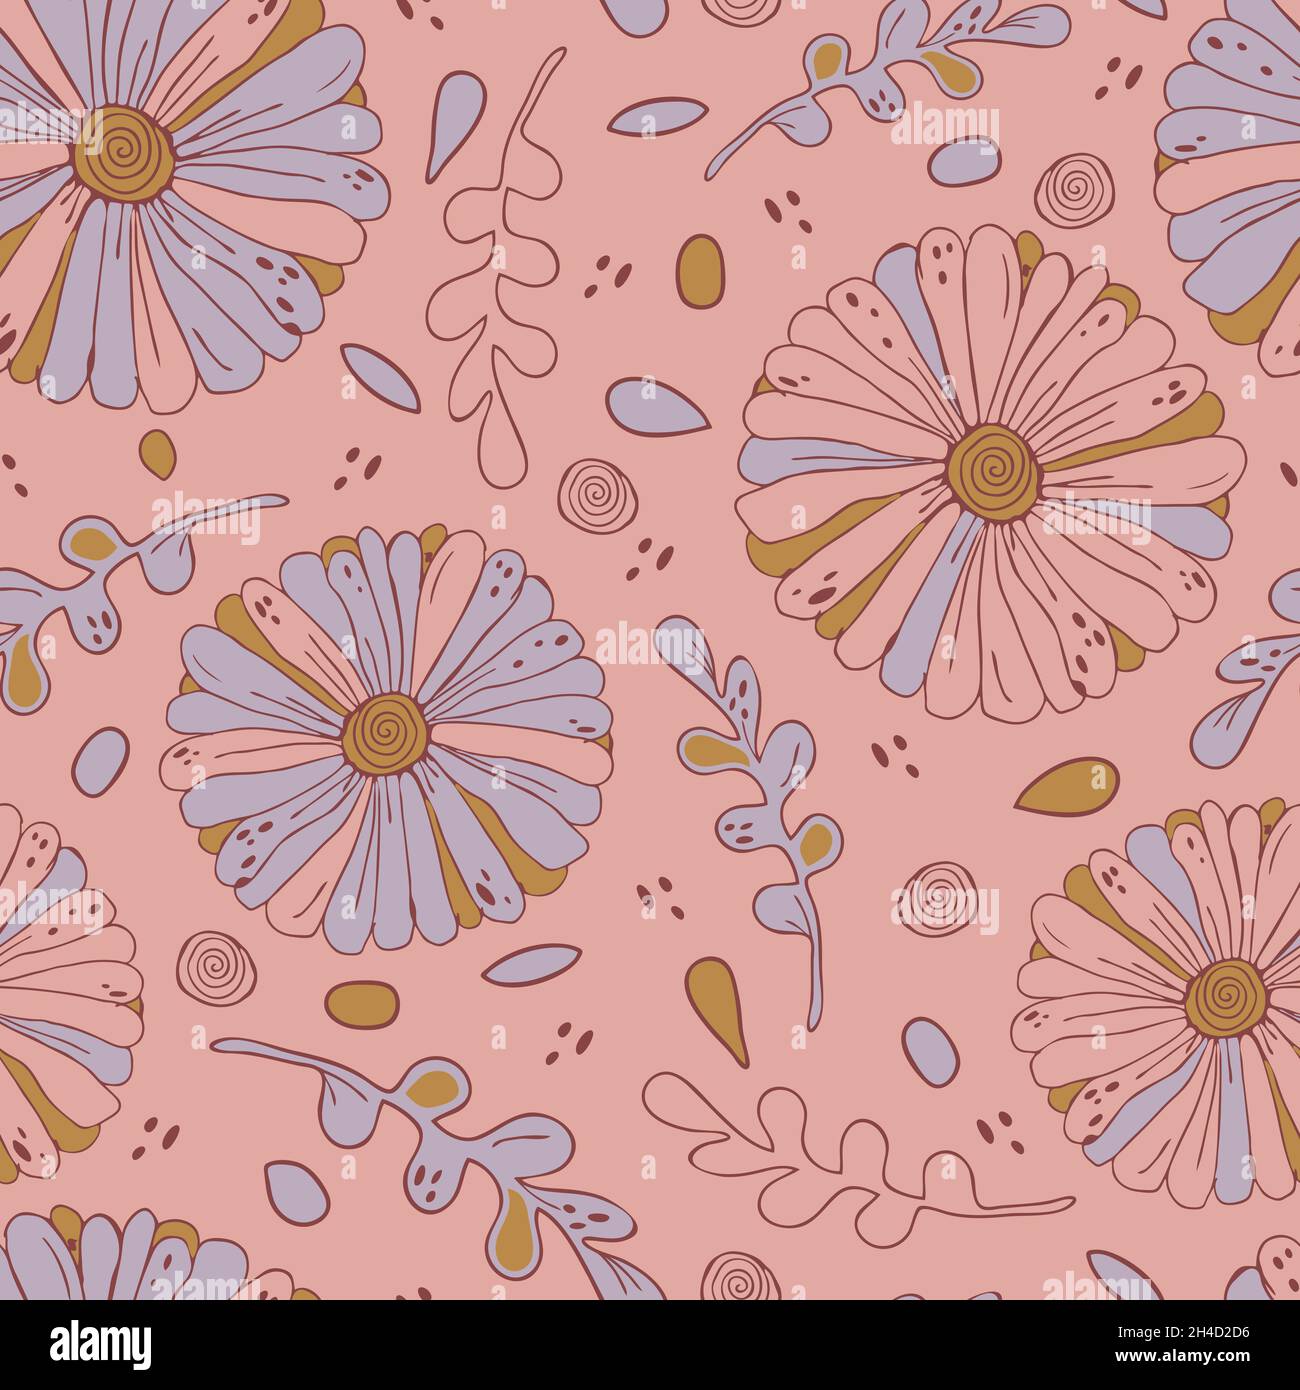 Seamless vector pattern with hand drawn daisy's on pink background. Romantic floral wallpaper texture. Summer flower fashion textile. Stock Vector